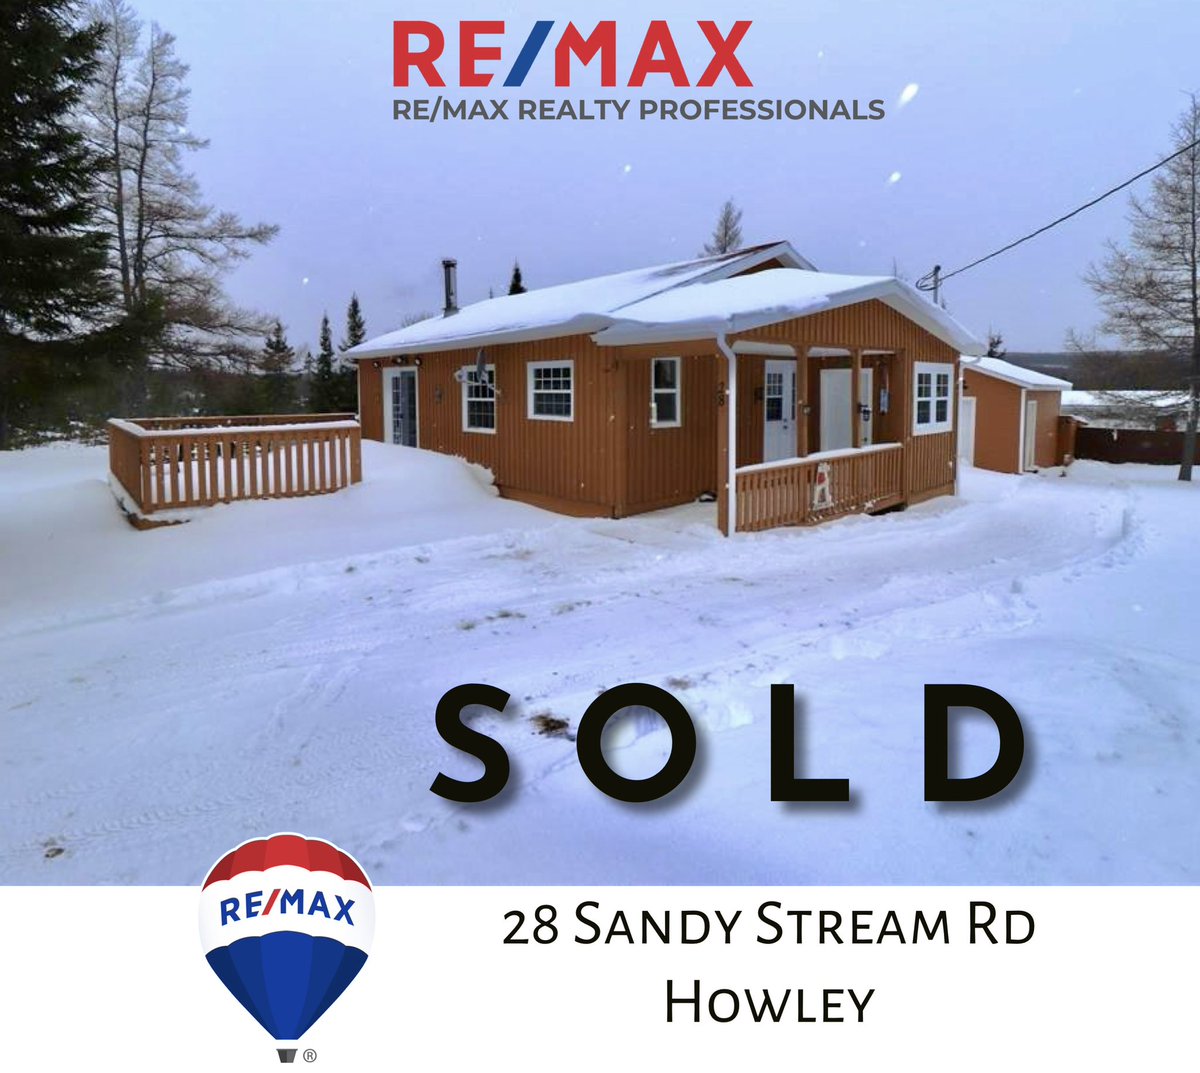 🏡 🔑 ❗️S O L D ❗️🔑🏡
28 Sandy stream rd - Howley 
Call 📱 today & let me go to work for you!
Cory Reid RE/MAX | REALTOR® 
RE/MAX  - 709.636.4294
#coryreidremaxrealtor #remax_deerlake #coryreidremax #remaxagent #REMAXCanada #howleynl  #cabinlife  #sold2024 #howleynl